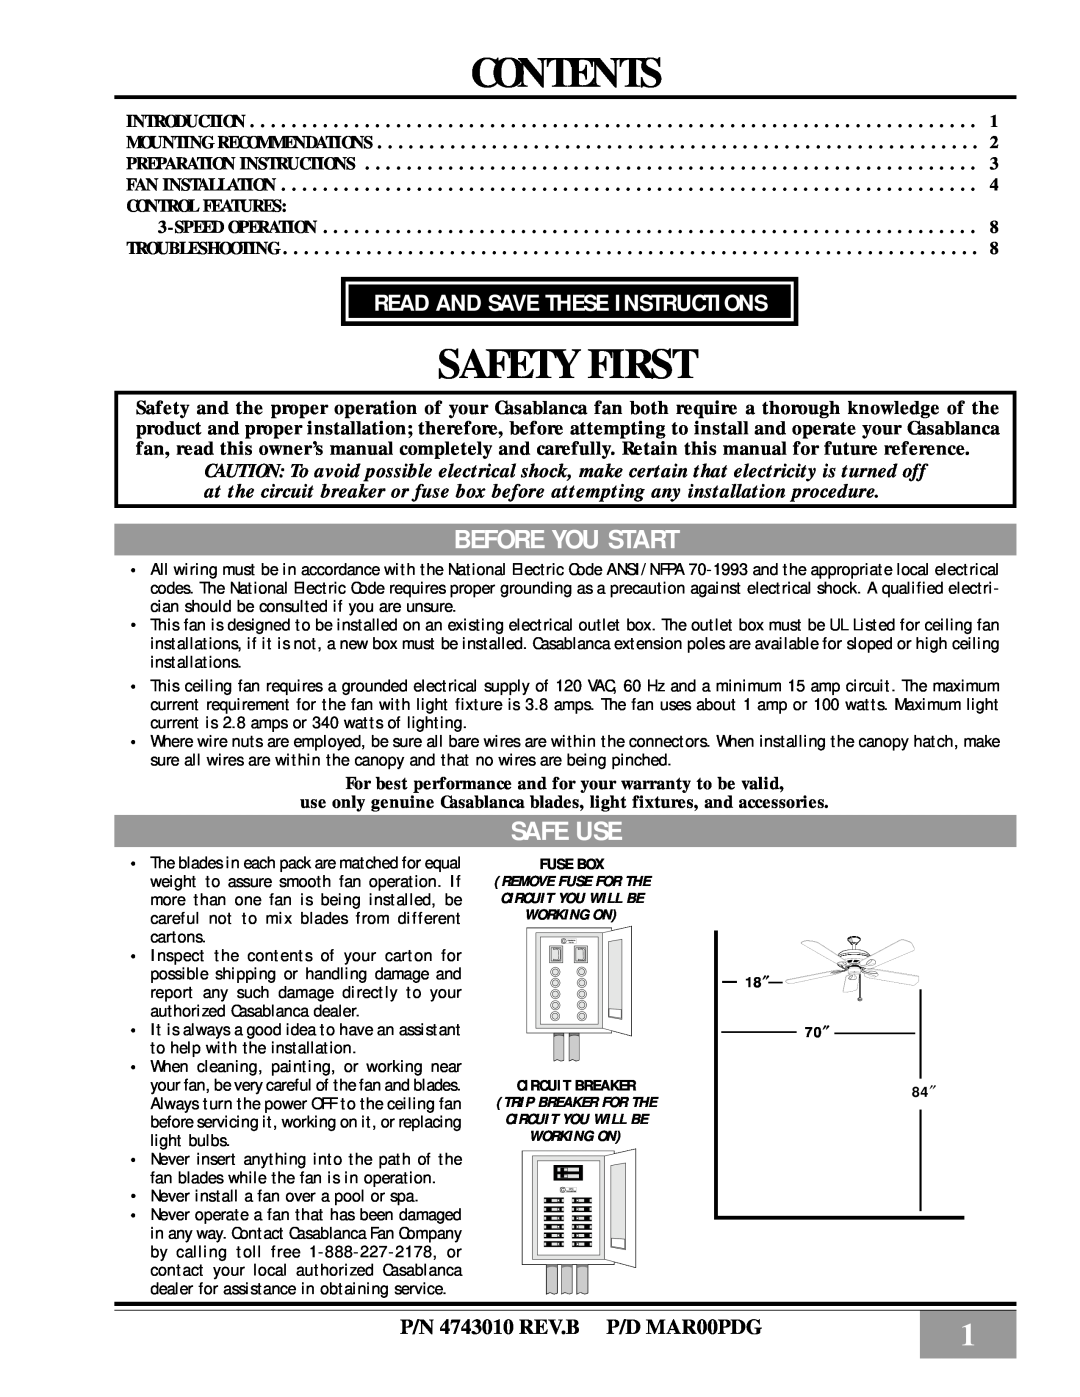 Casablanca Fan Company III manual Before You Start, Safe Use, Read And Save These Instructions, Control Features, Contents 